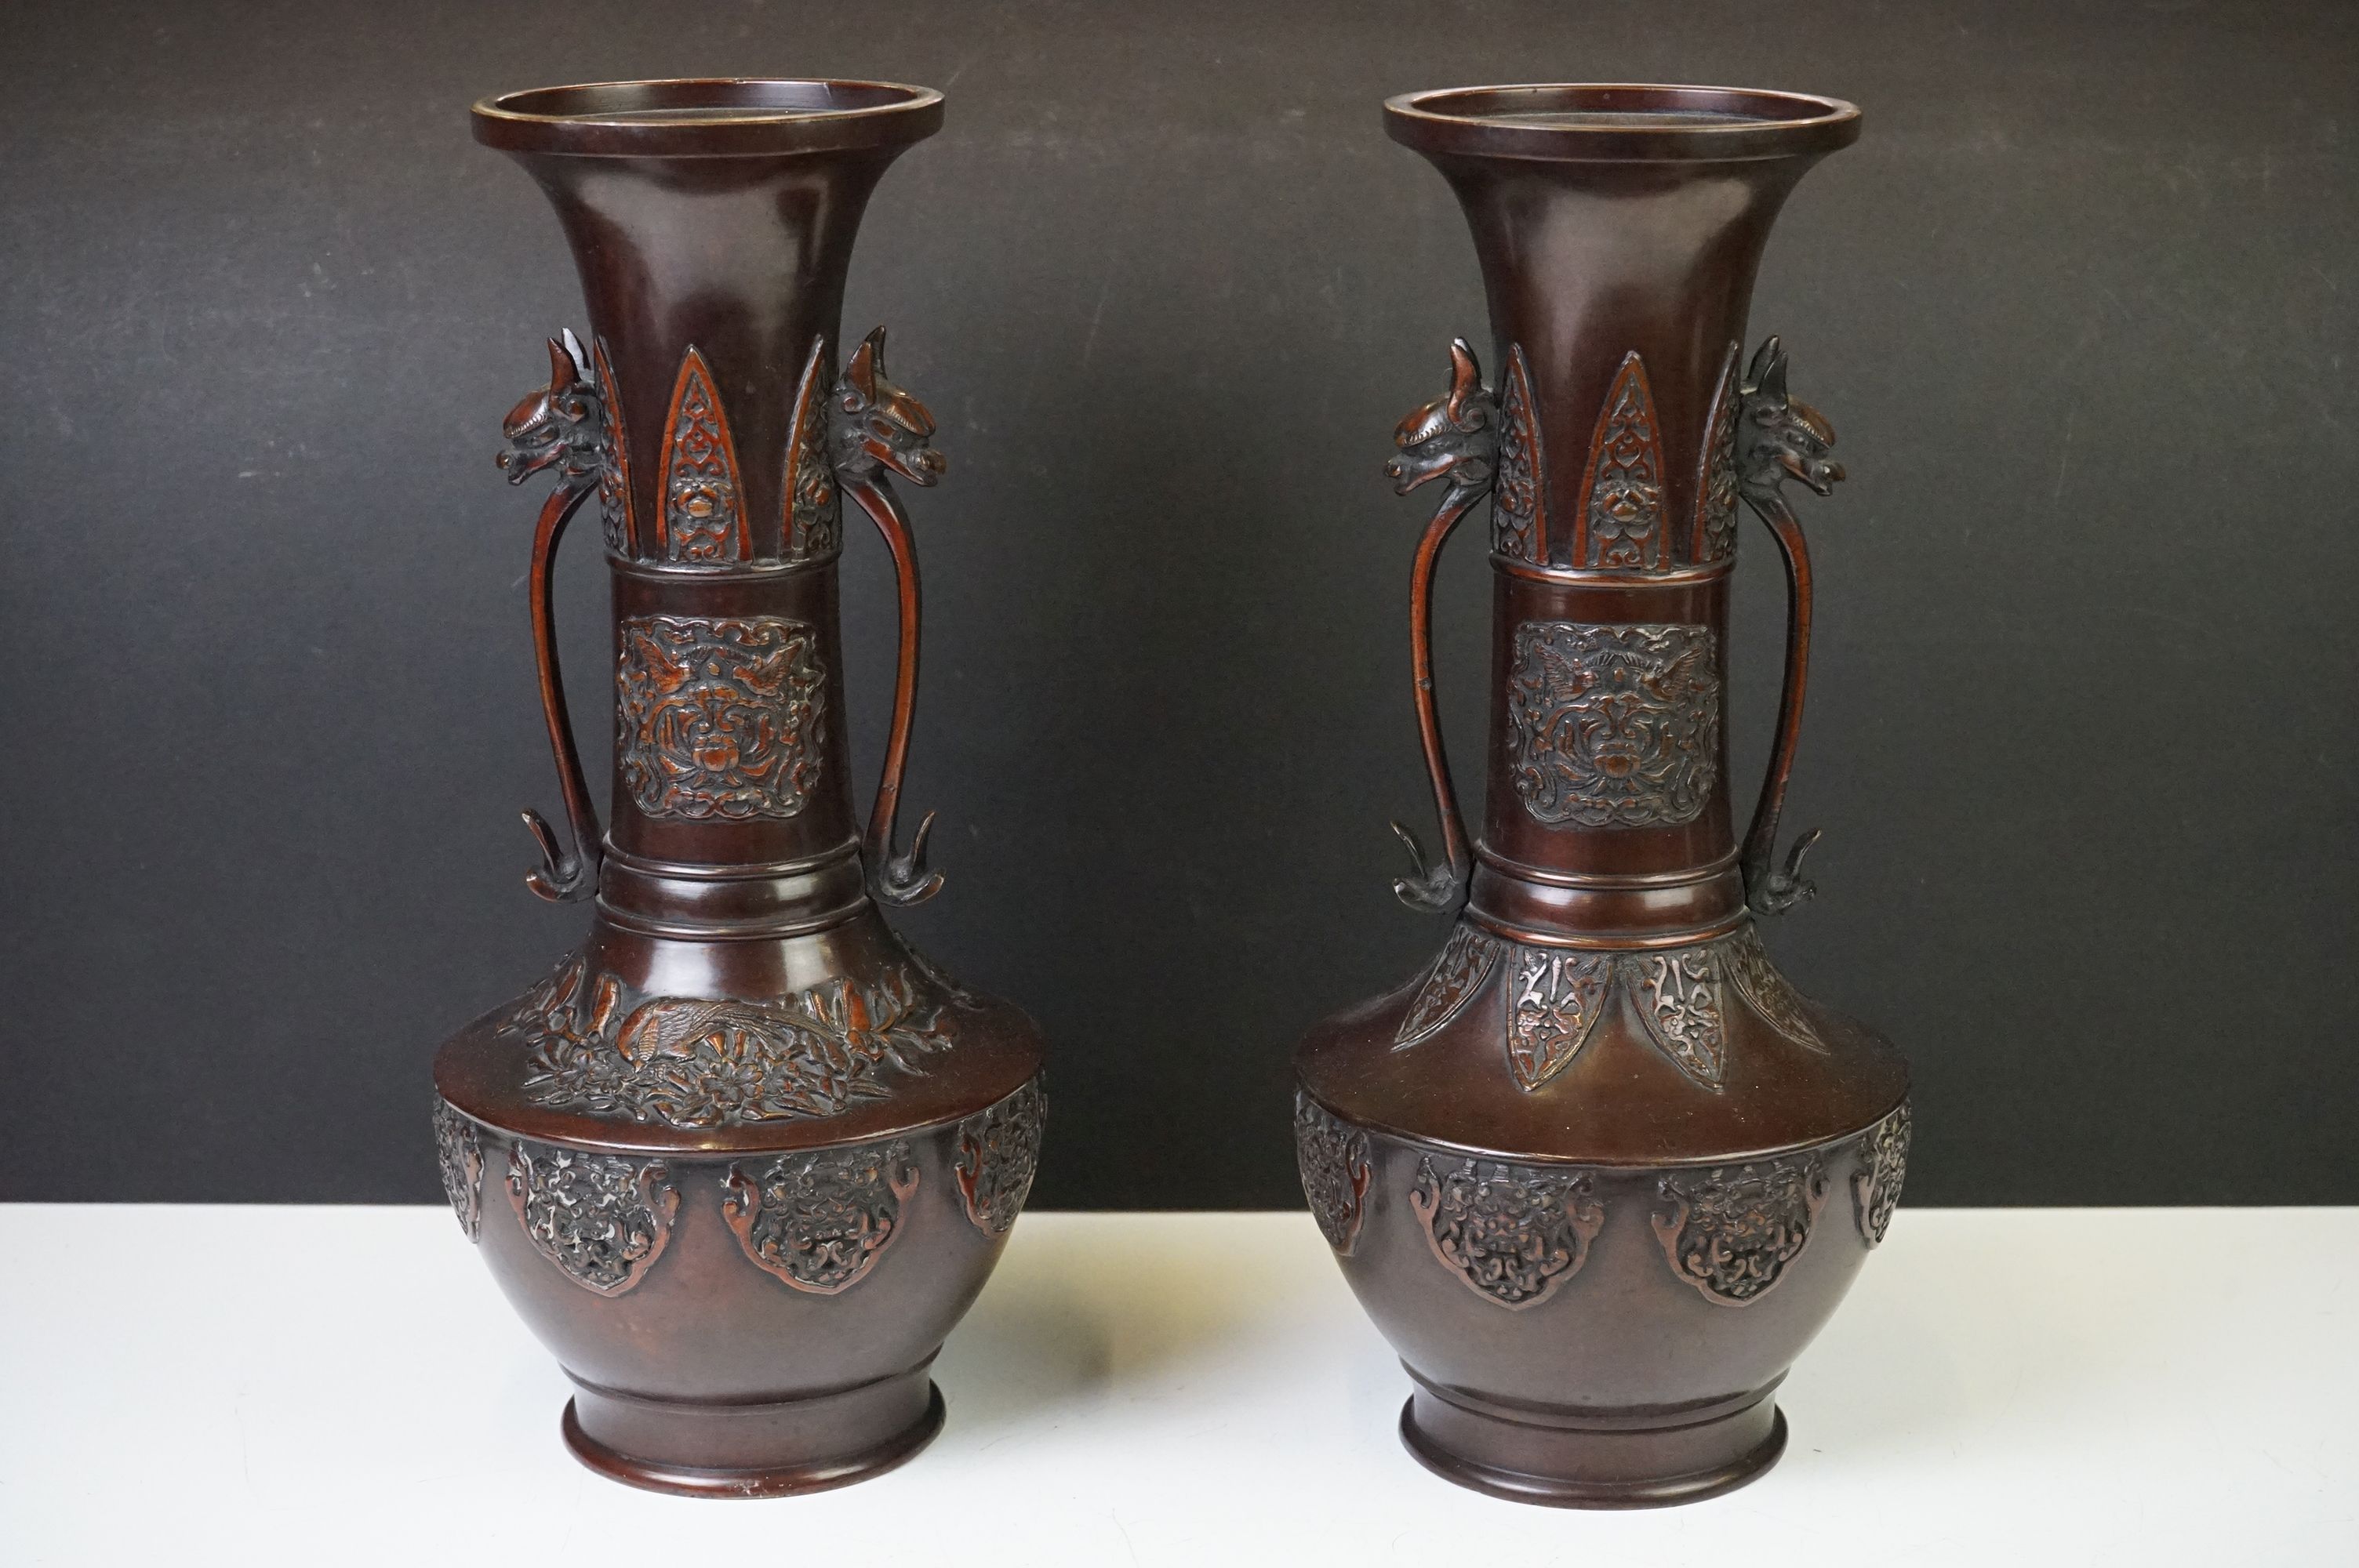 Near pair of Japanese bronze twin-handled bottle vases, with relief ornithological decoration and